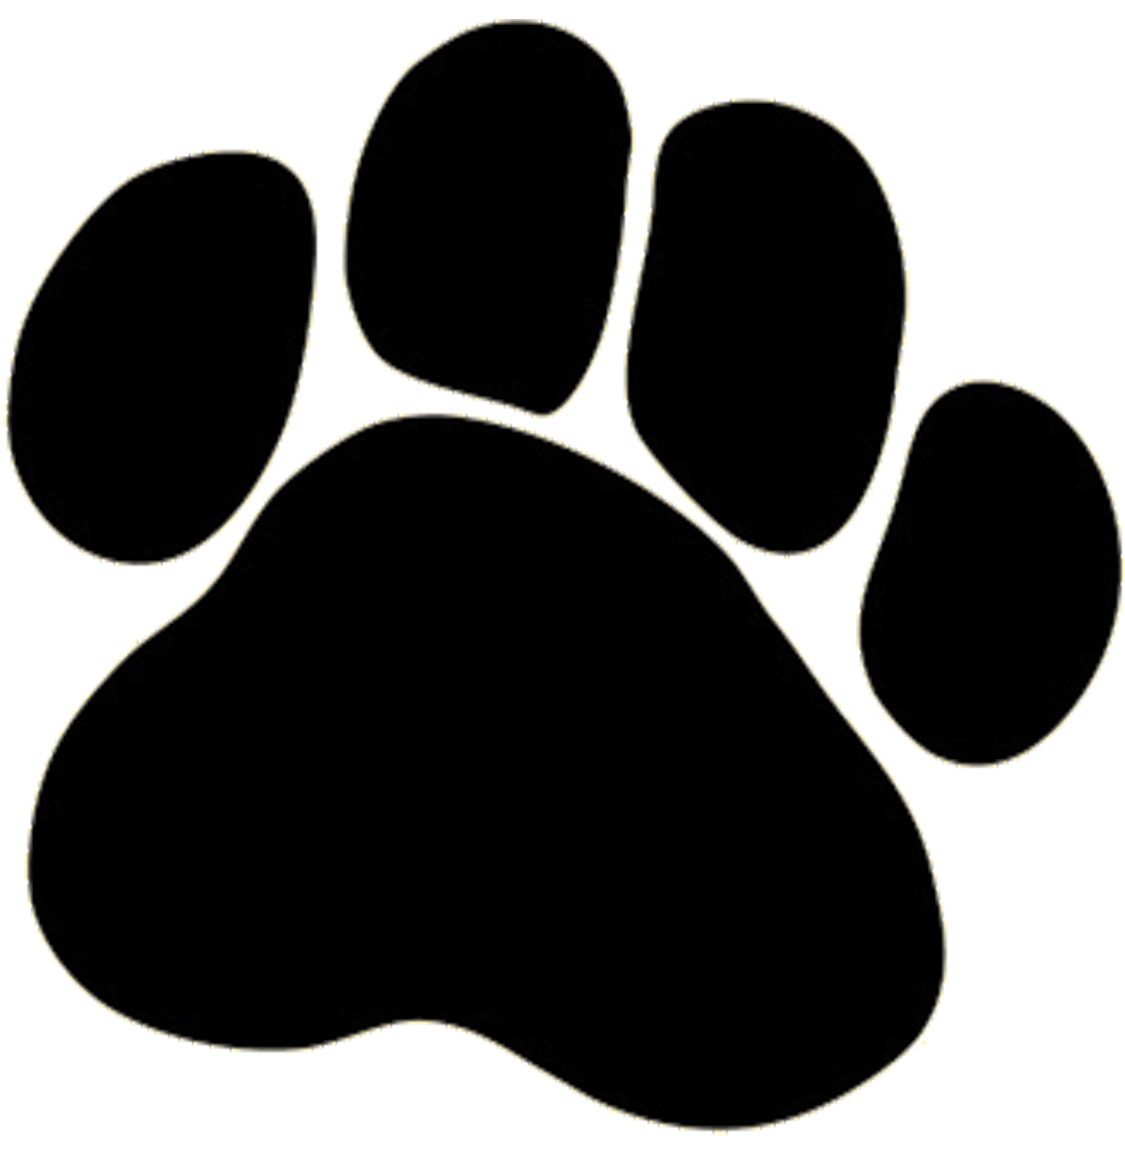 Dog paw prints dog paw border clipart free images 2 wikiclipart